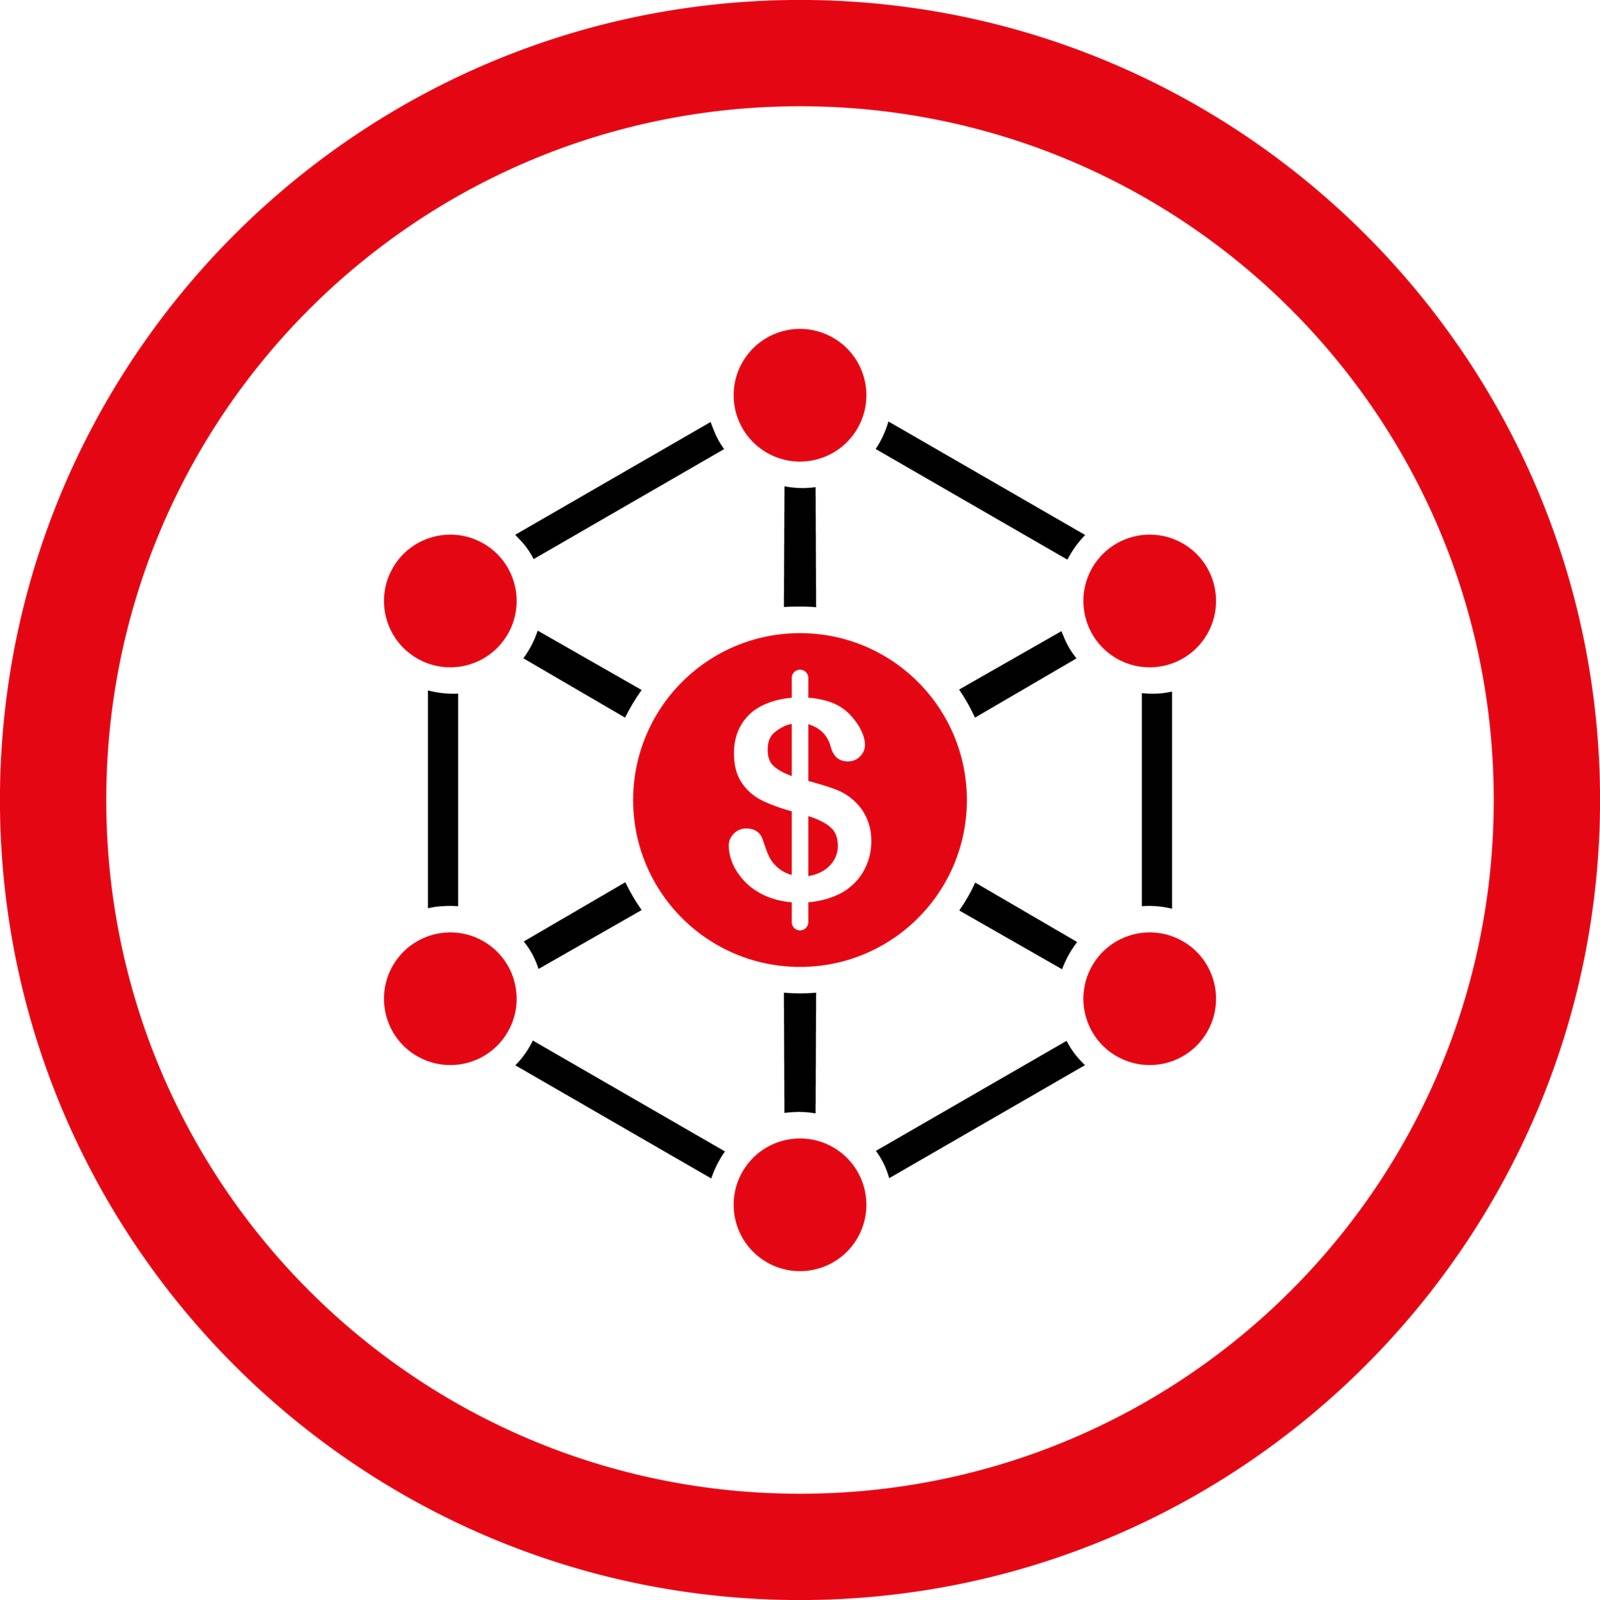 Scheme vector icon. This flat rounded symbol uses intensive red and black colors and isolated on a white background.